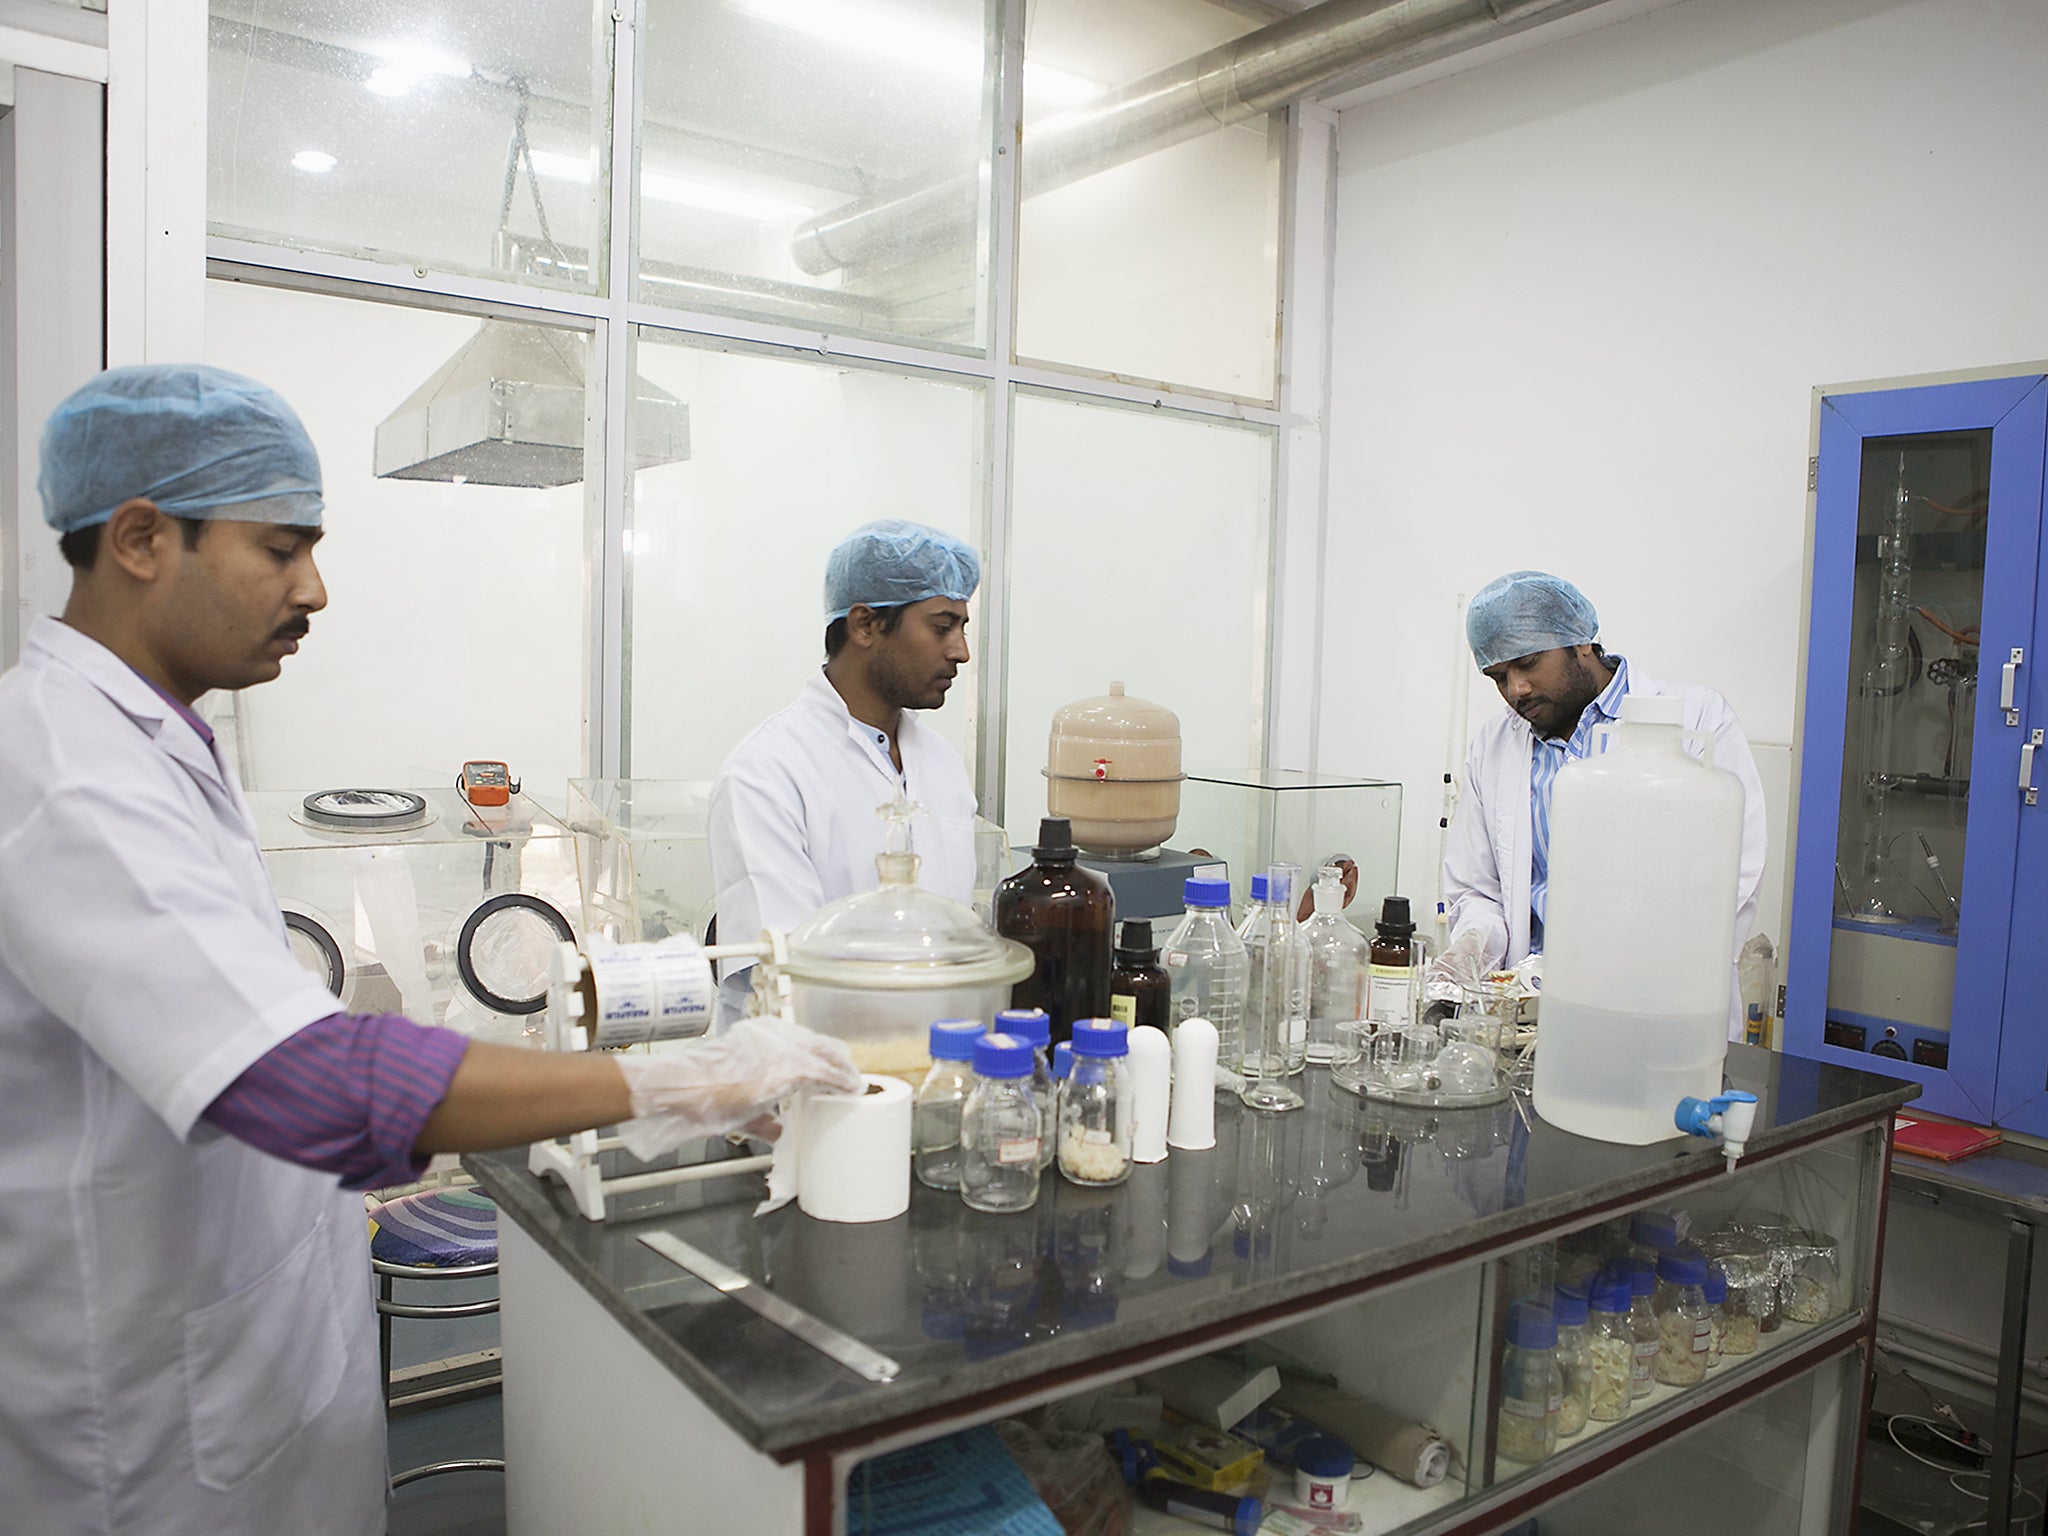 &#13;
Research assistants work at the Risug laboratory at the Indian Institute of Technology in Kharagpur &#13;